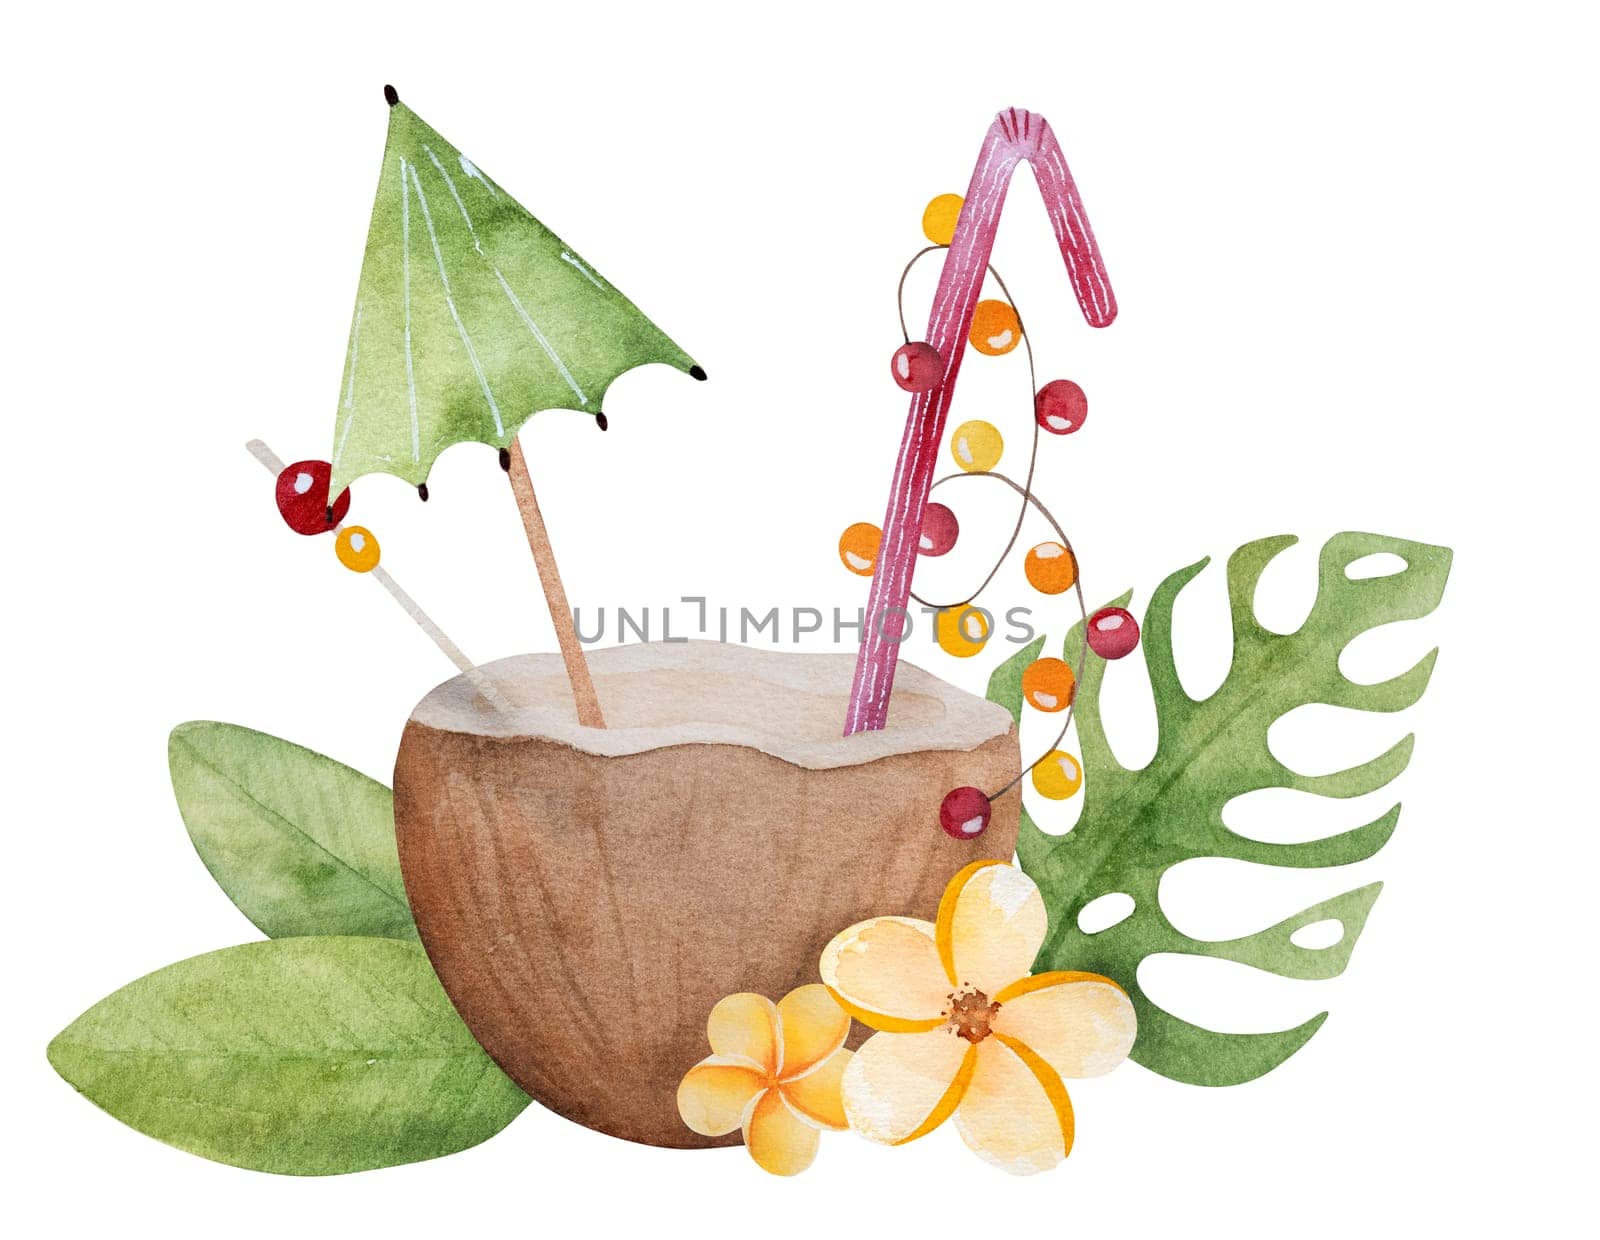 Hand-Drawn Illustration A Cocktail In A Coconut Decorated With An Umbrella, Tropical Flowers, And Leaves by tan4ikk1